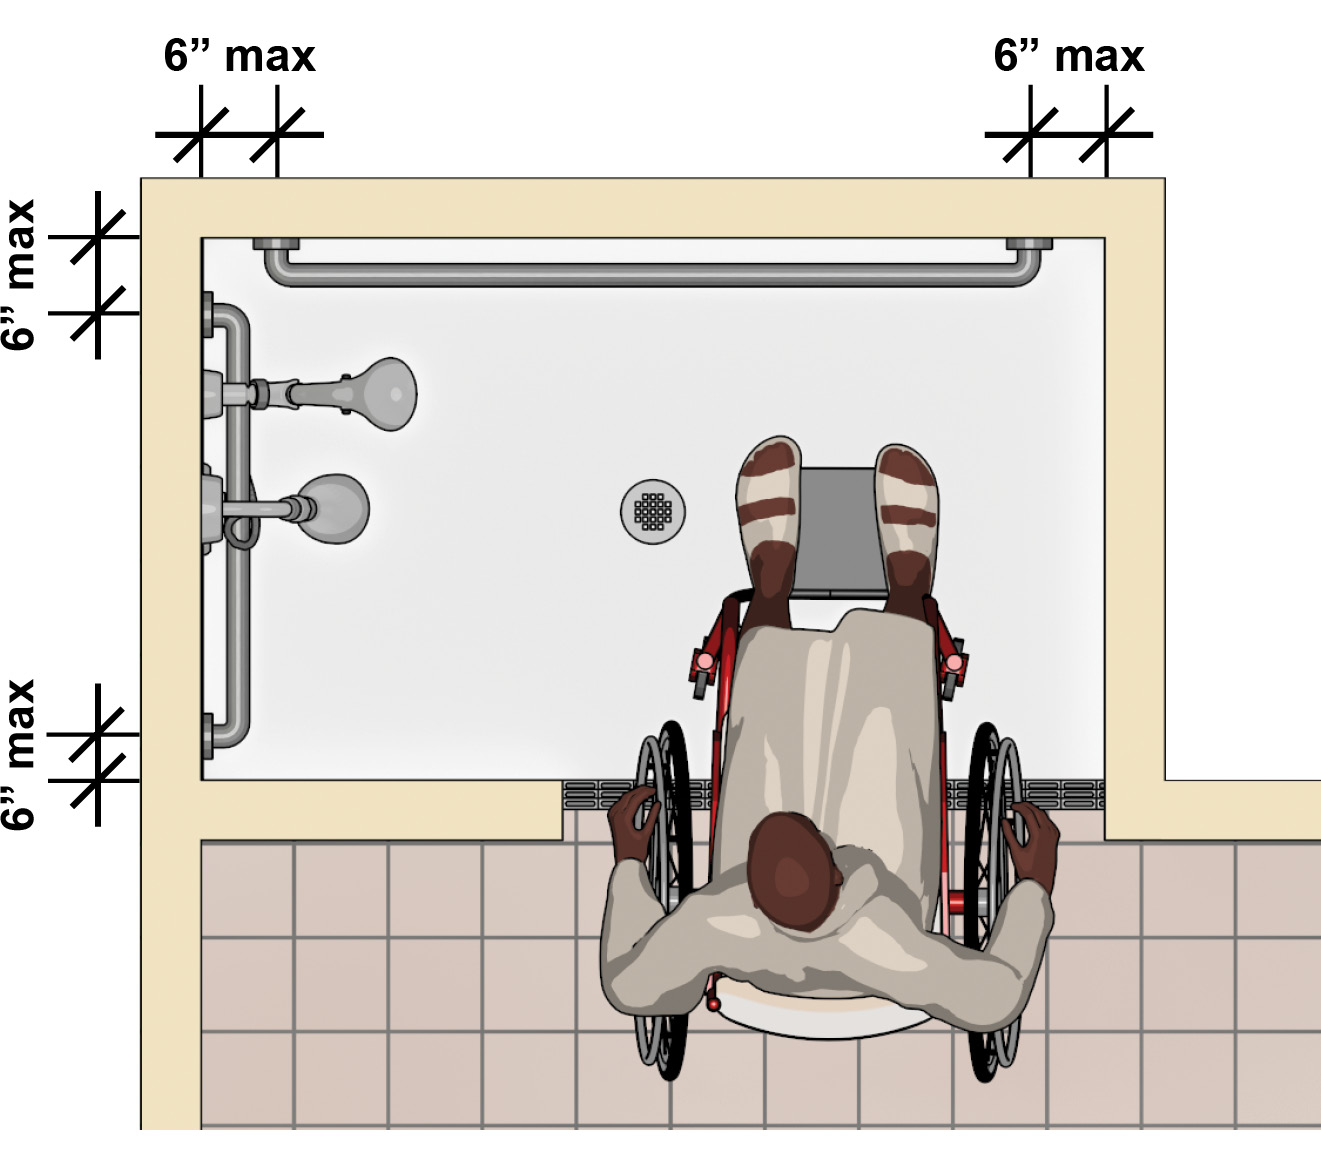 Person using wheelchair entering an alternate roll-in shower
compartment. The side wall farther from the opening and the back wall
have grab bars that extend 6 inches maximum from adjacent
walls.